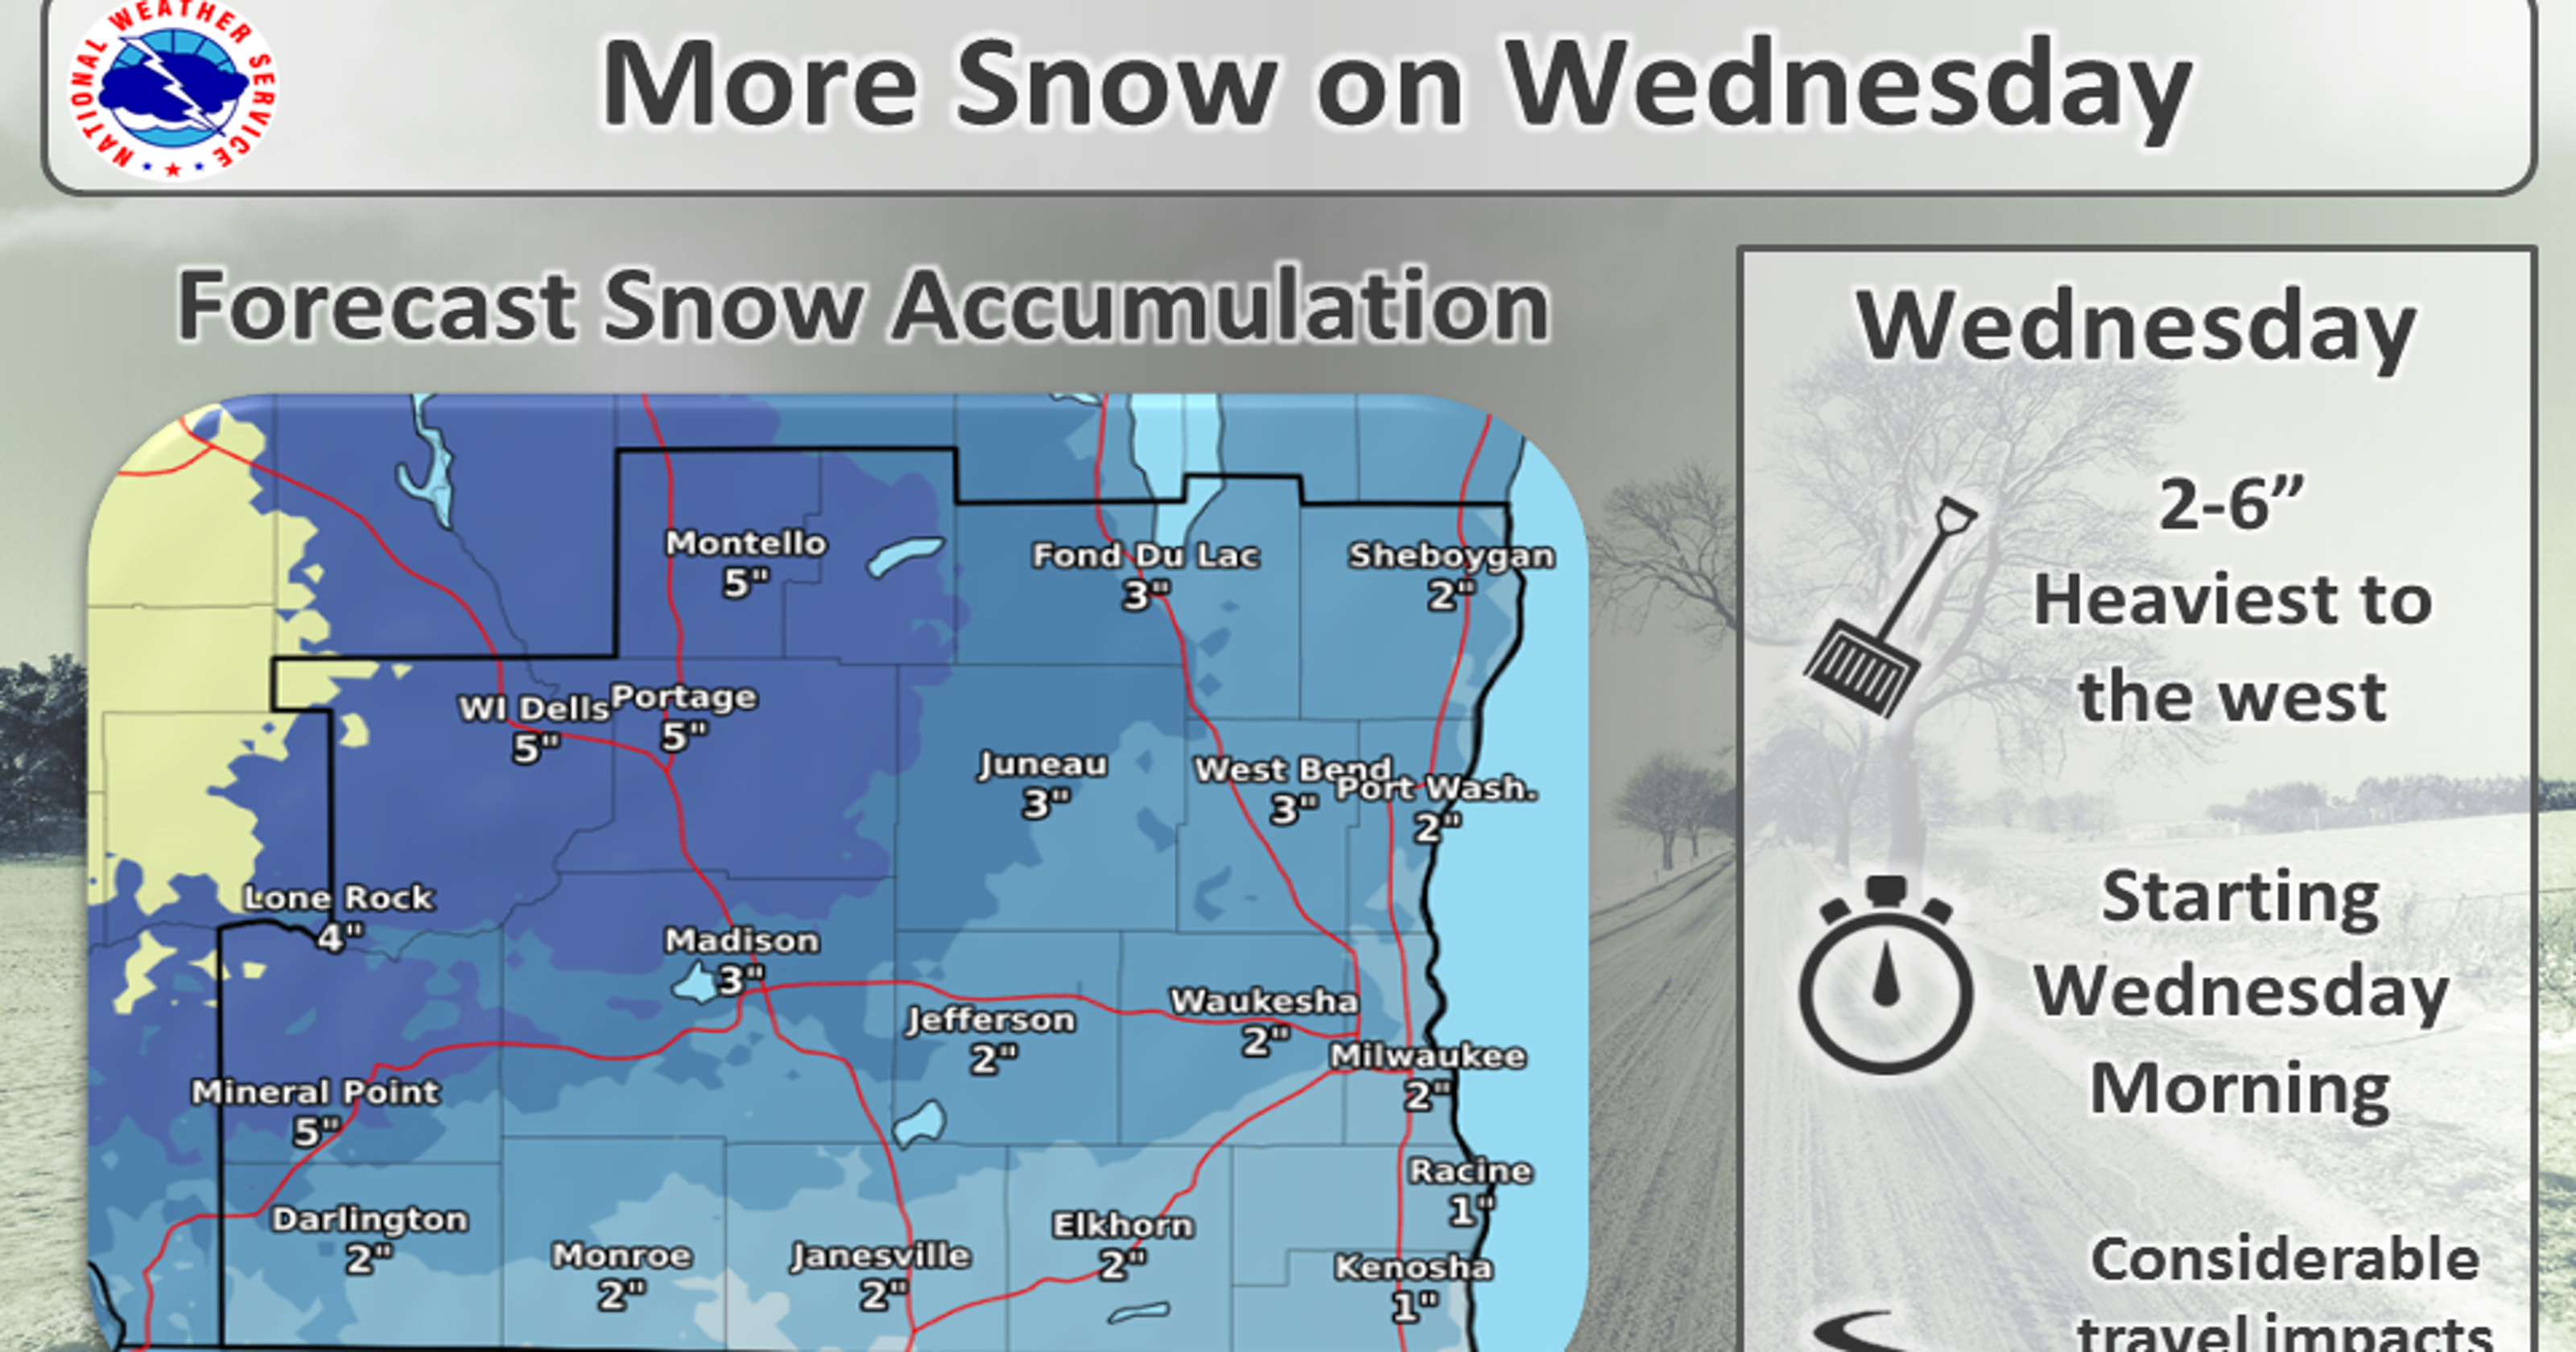 National Weather Service predicts more snow in Wisconsin Wednesday